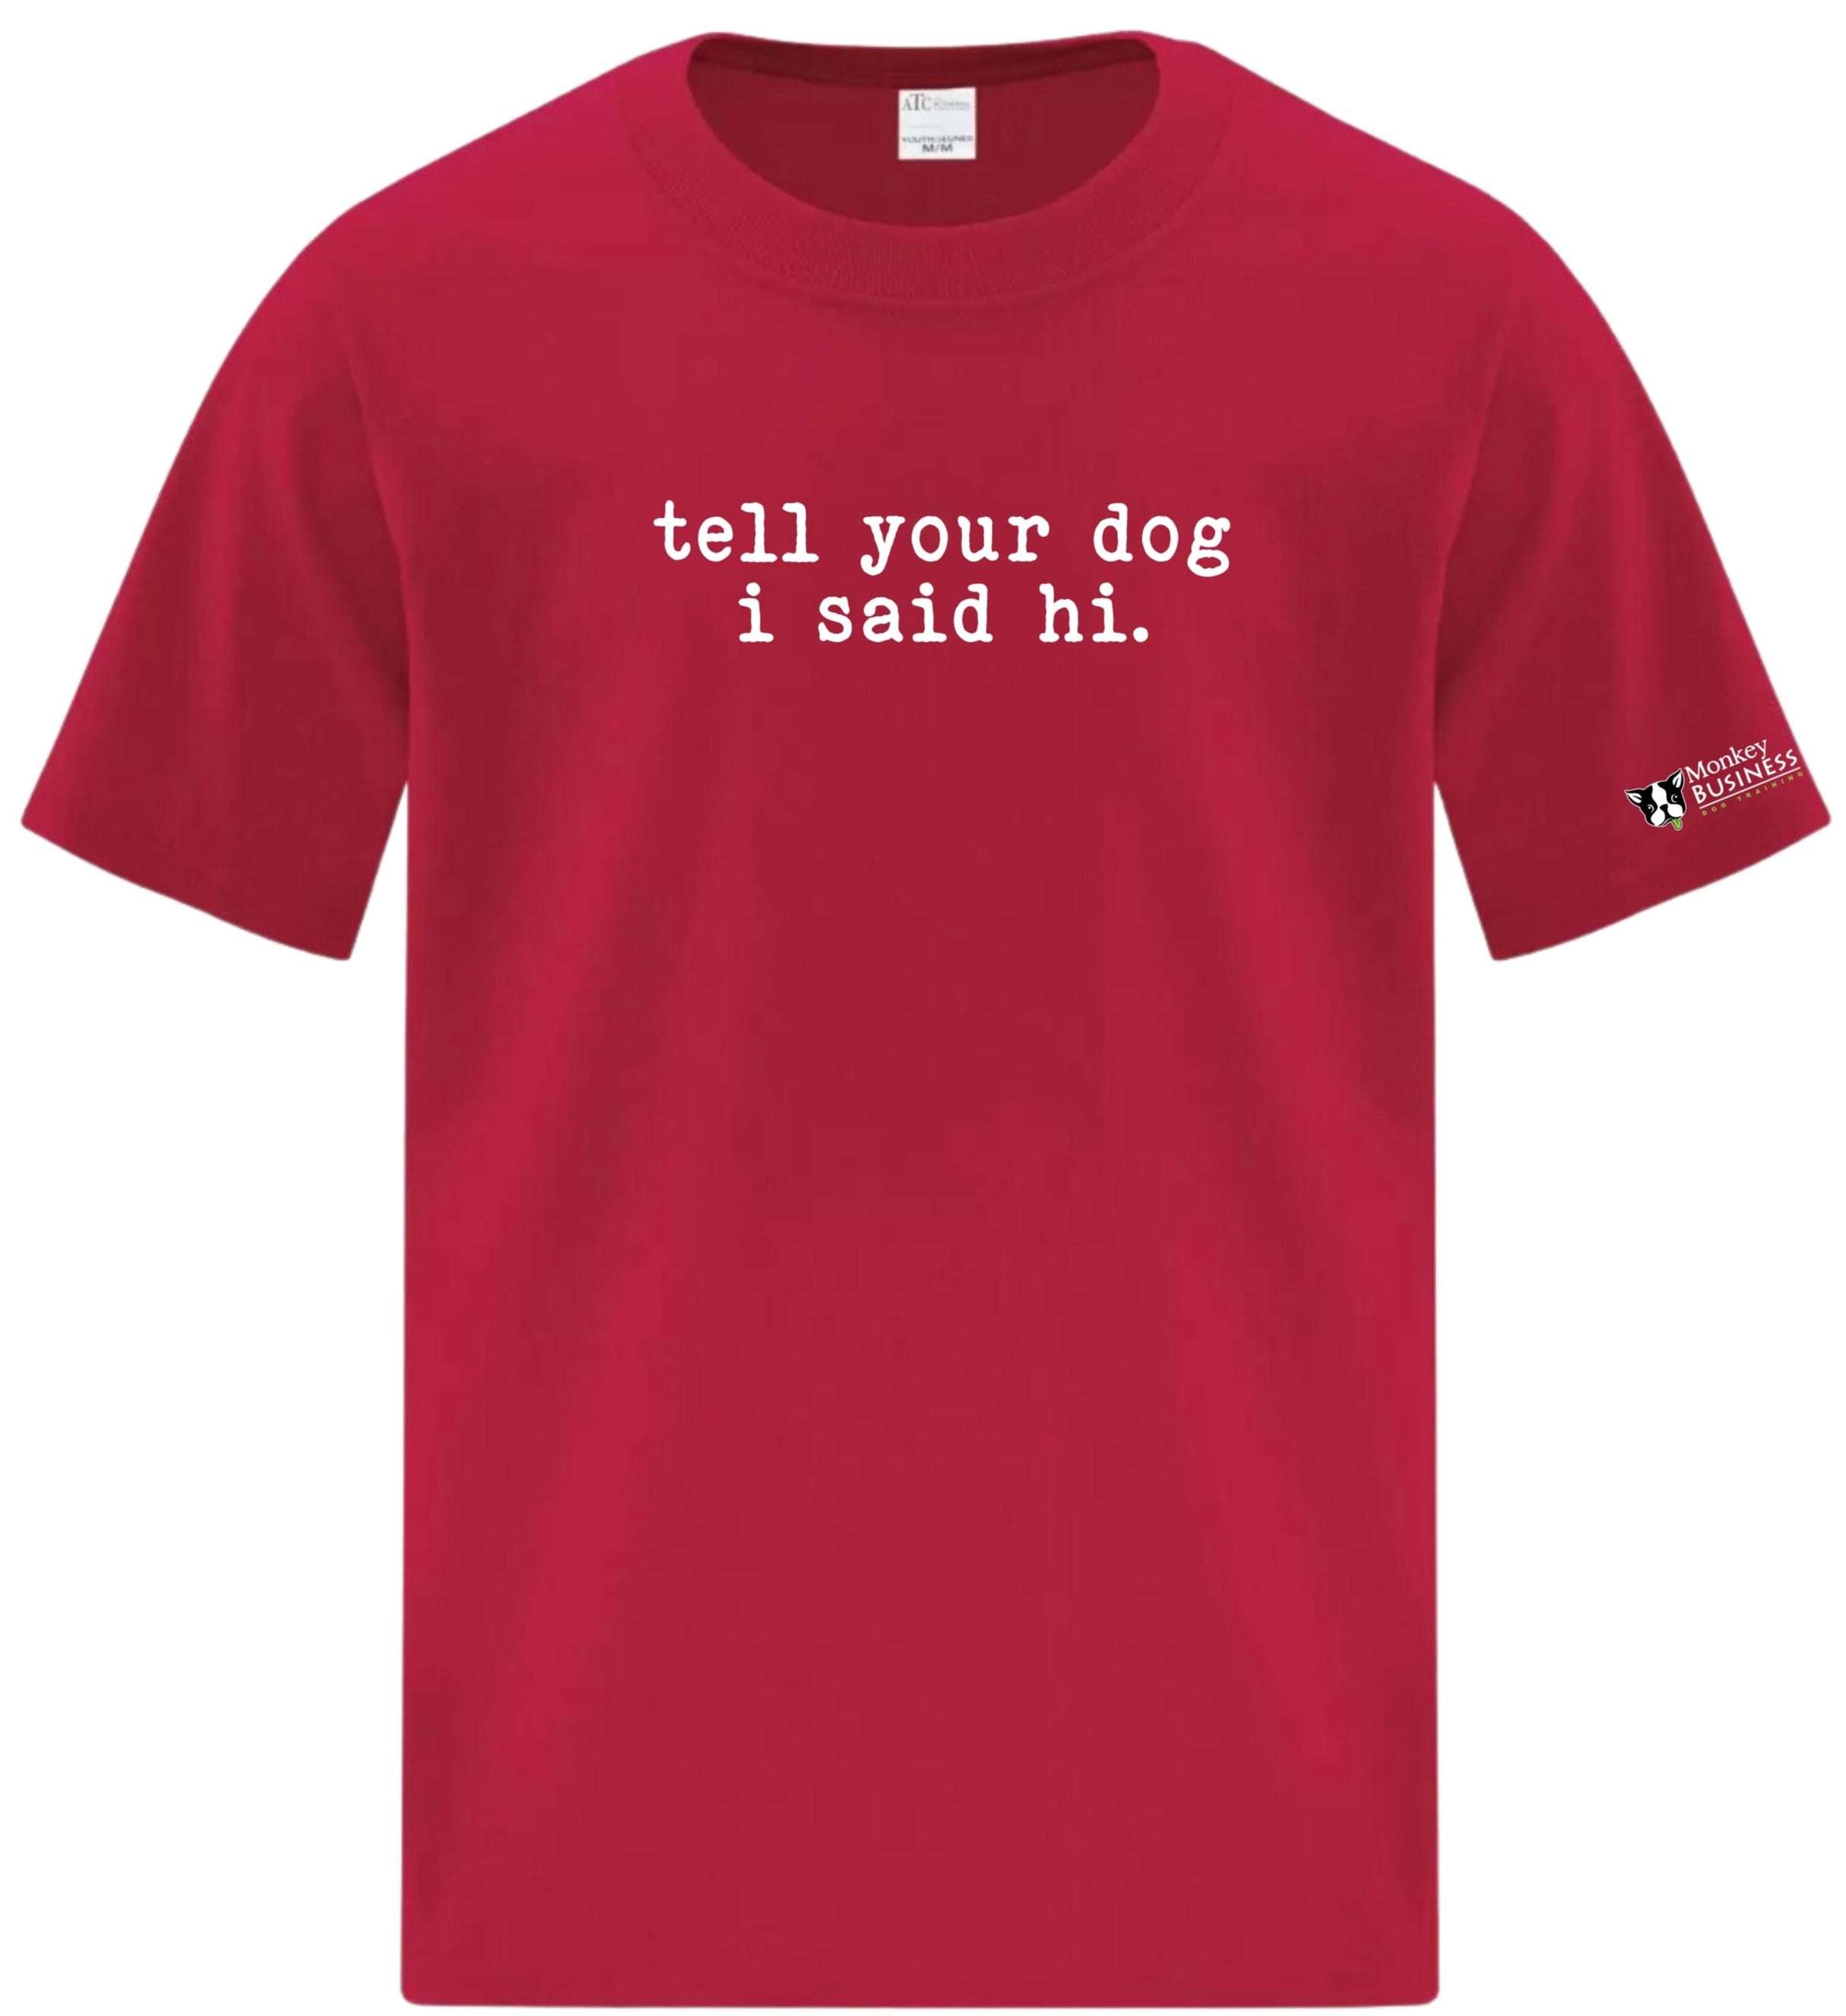 MB Youth T-Shirt- Say Hi To Your Dog